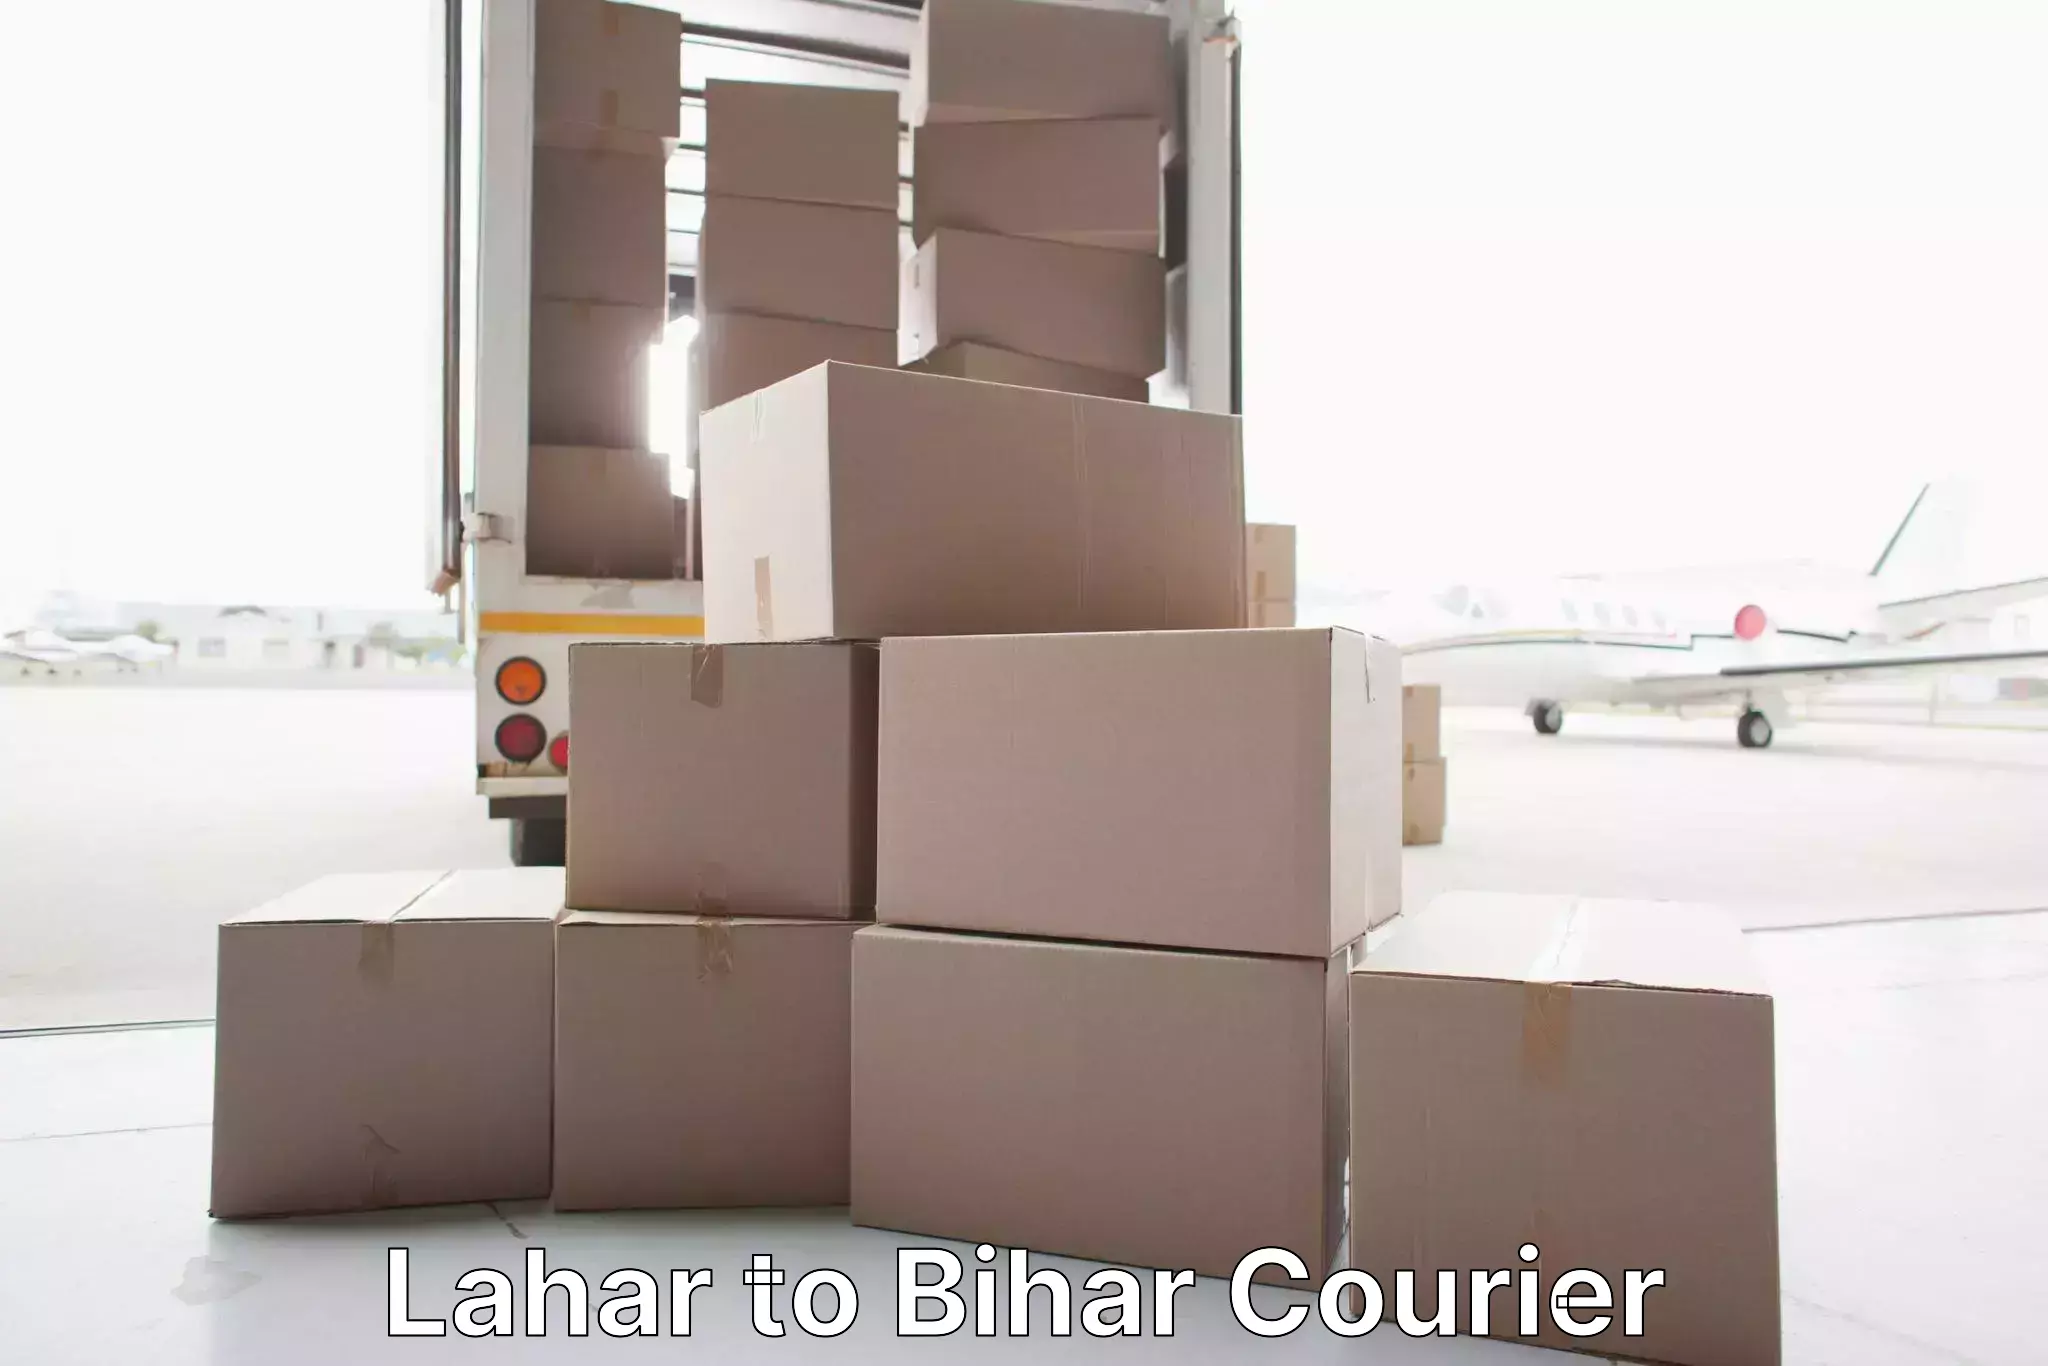 Professional packing services Lahar to Bihar